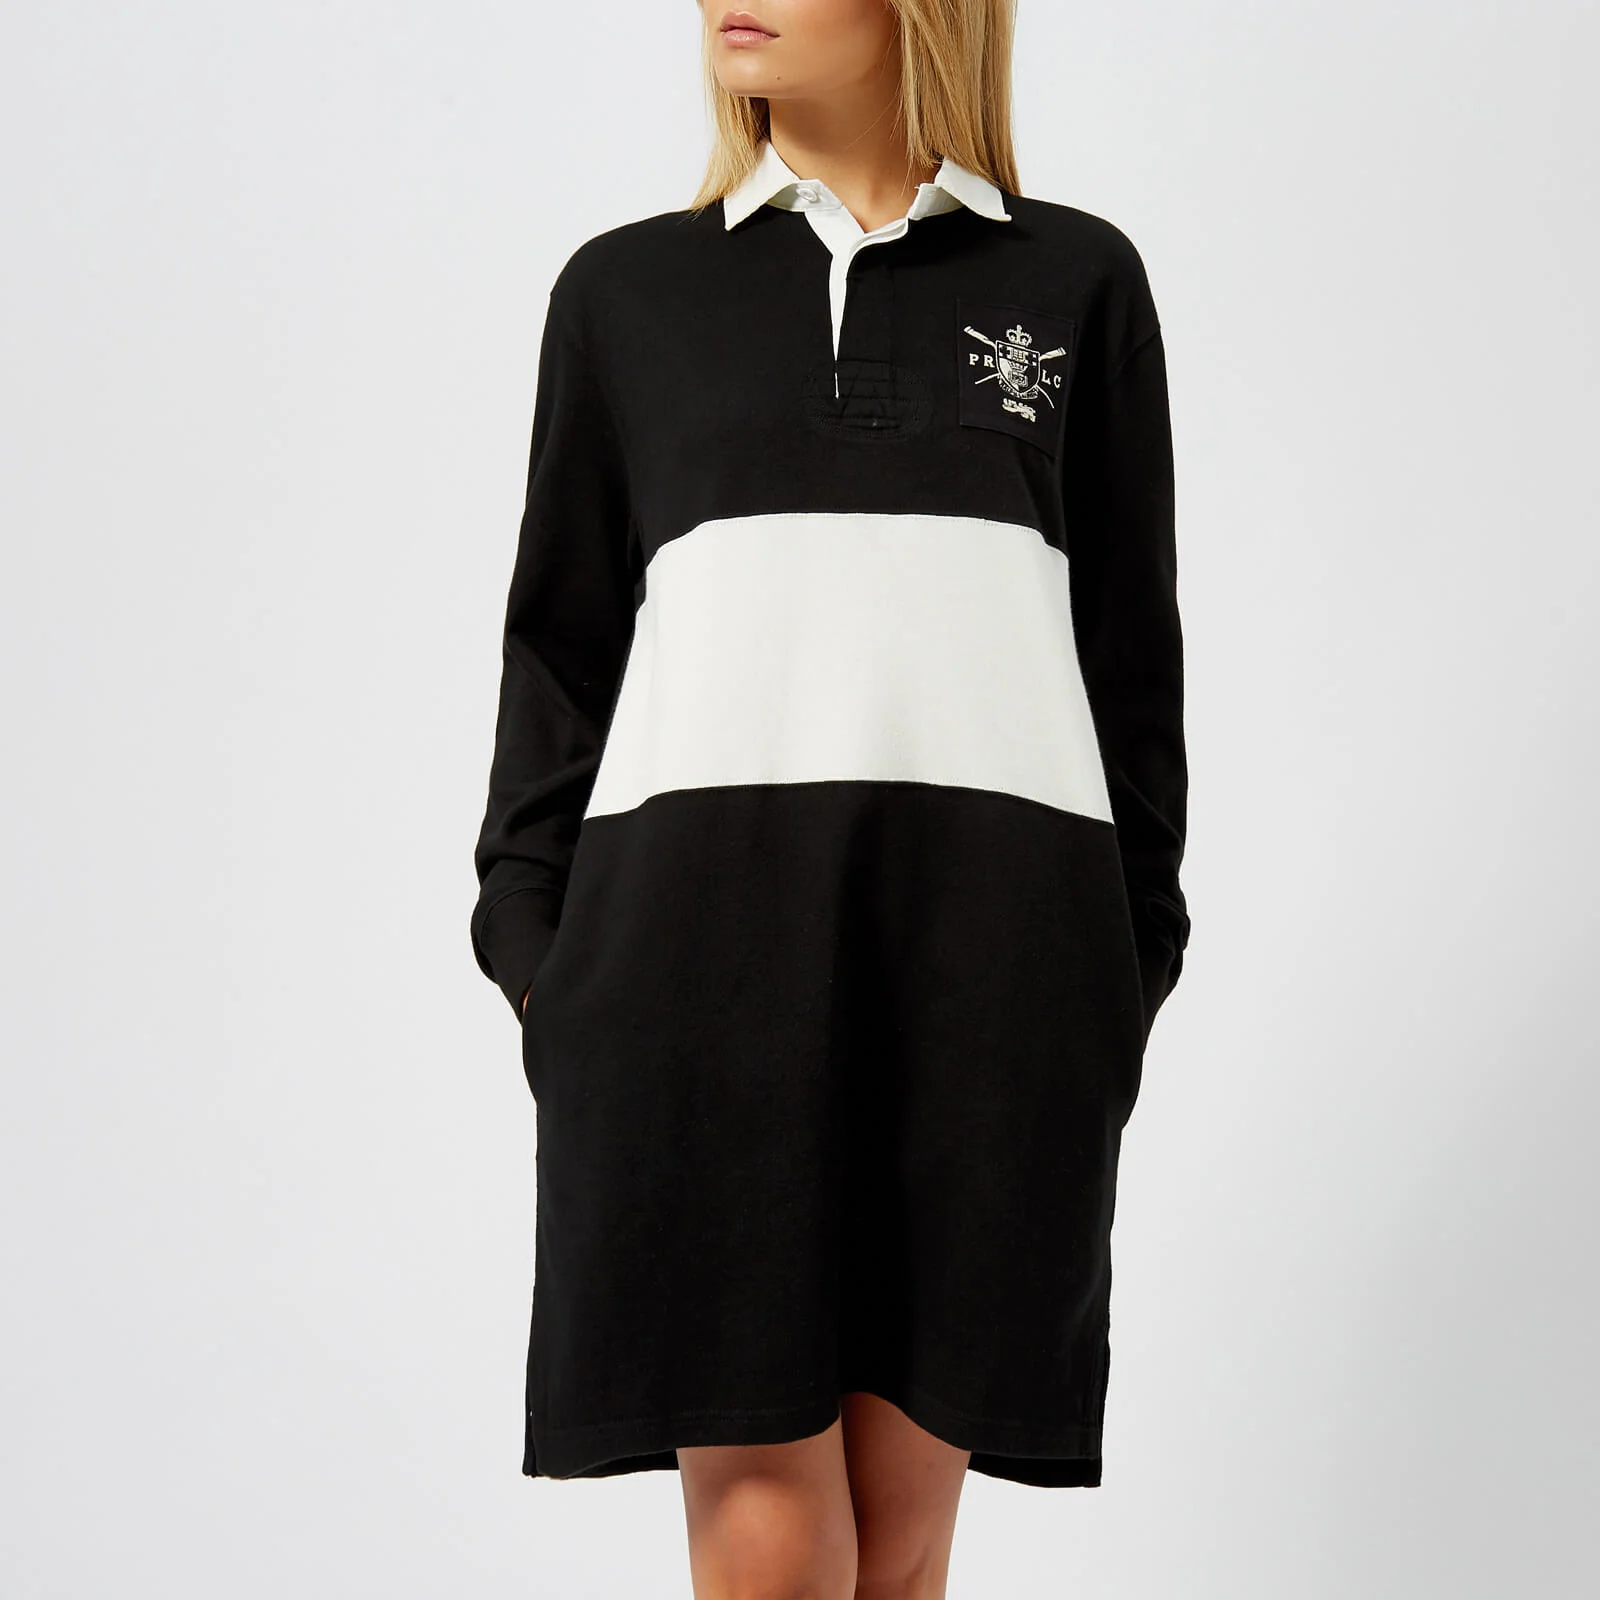 Polo Ralph Lauren Women's Rugby Casual Dress - Polo Black/Deckwash White Image 1